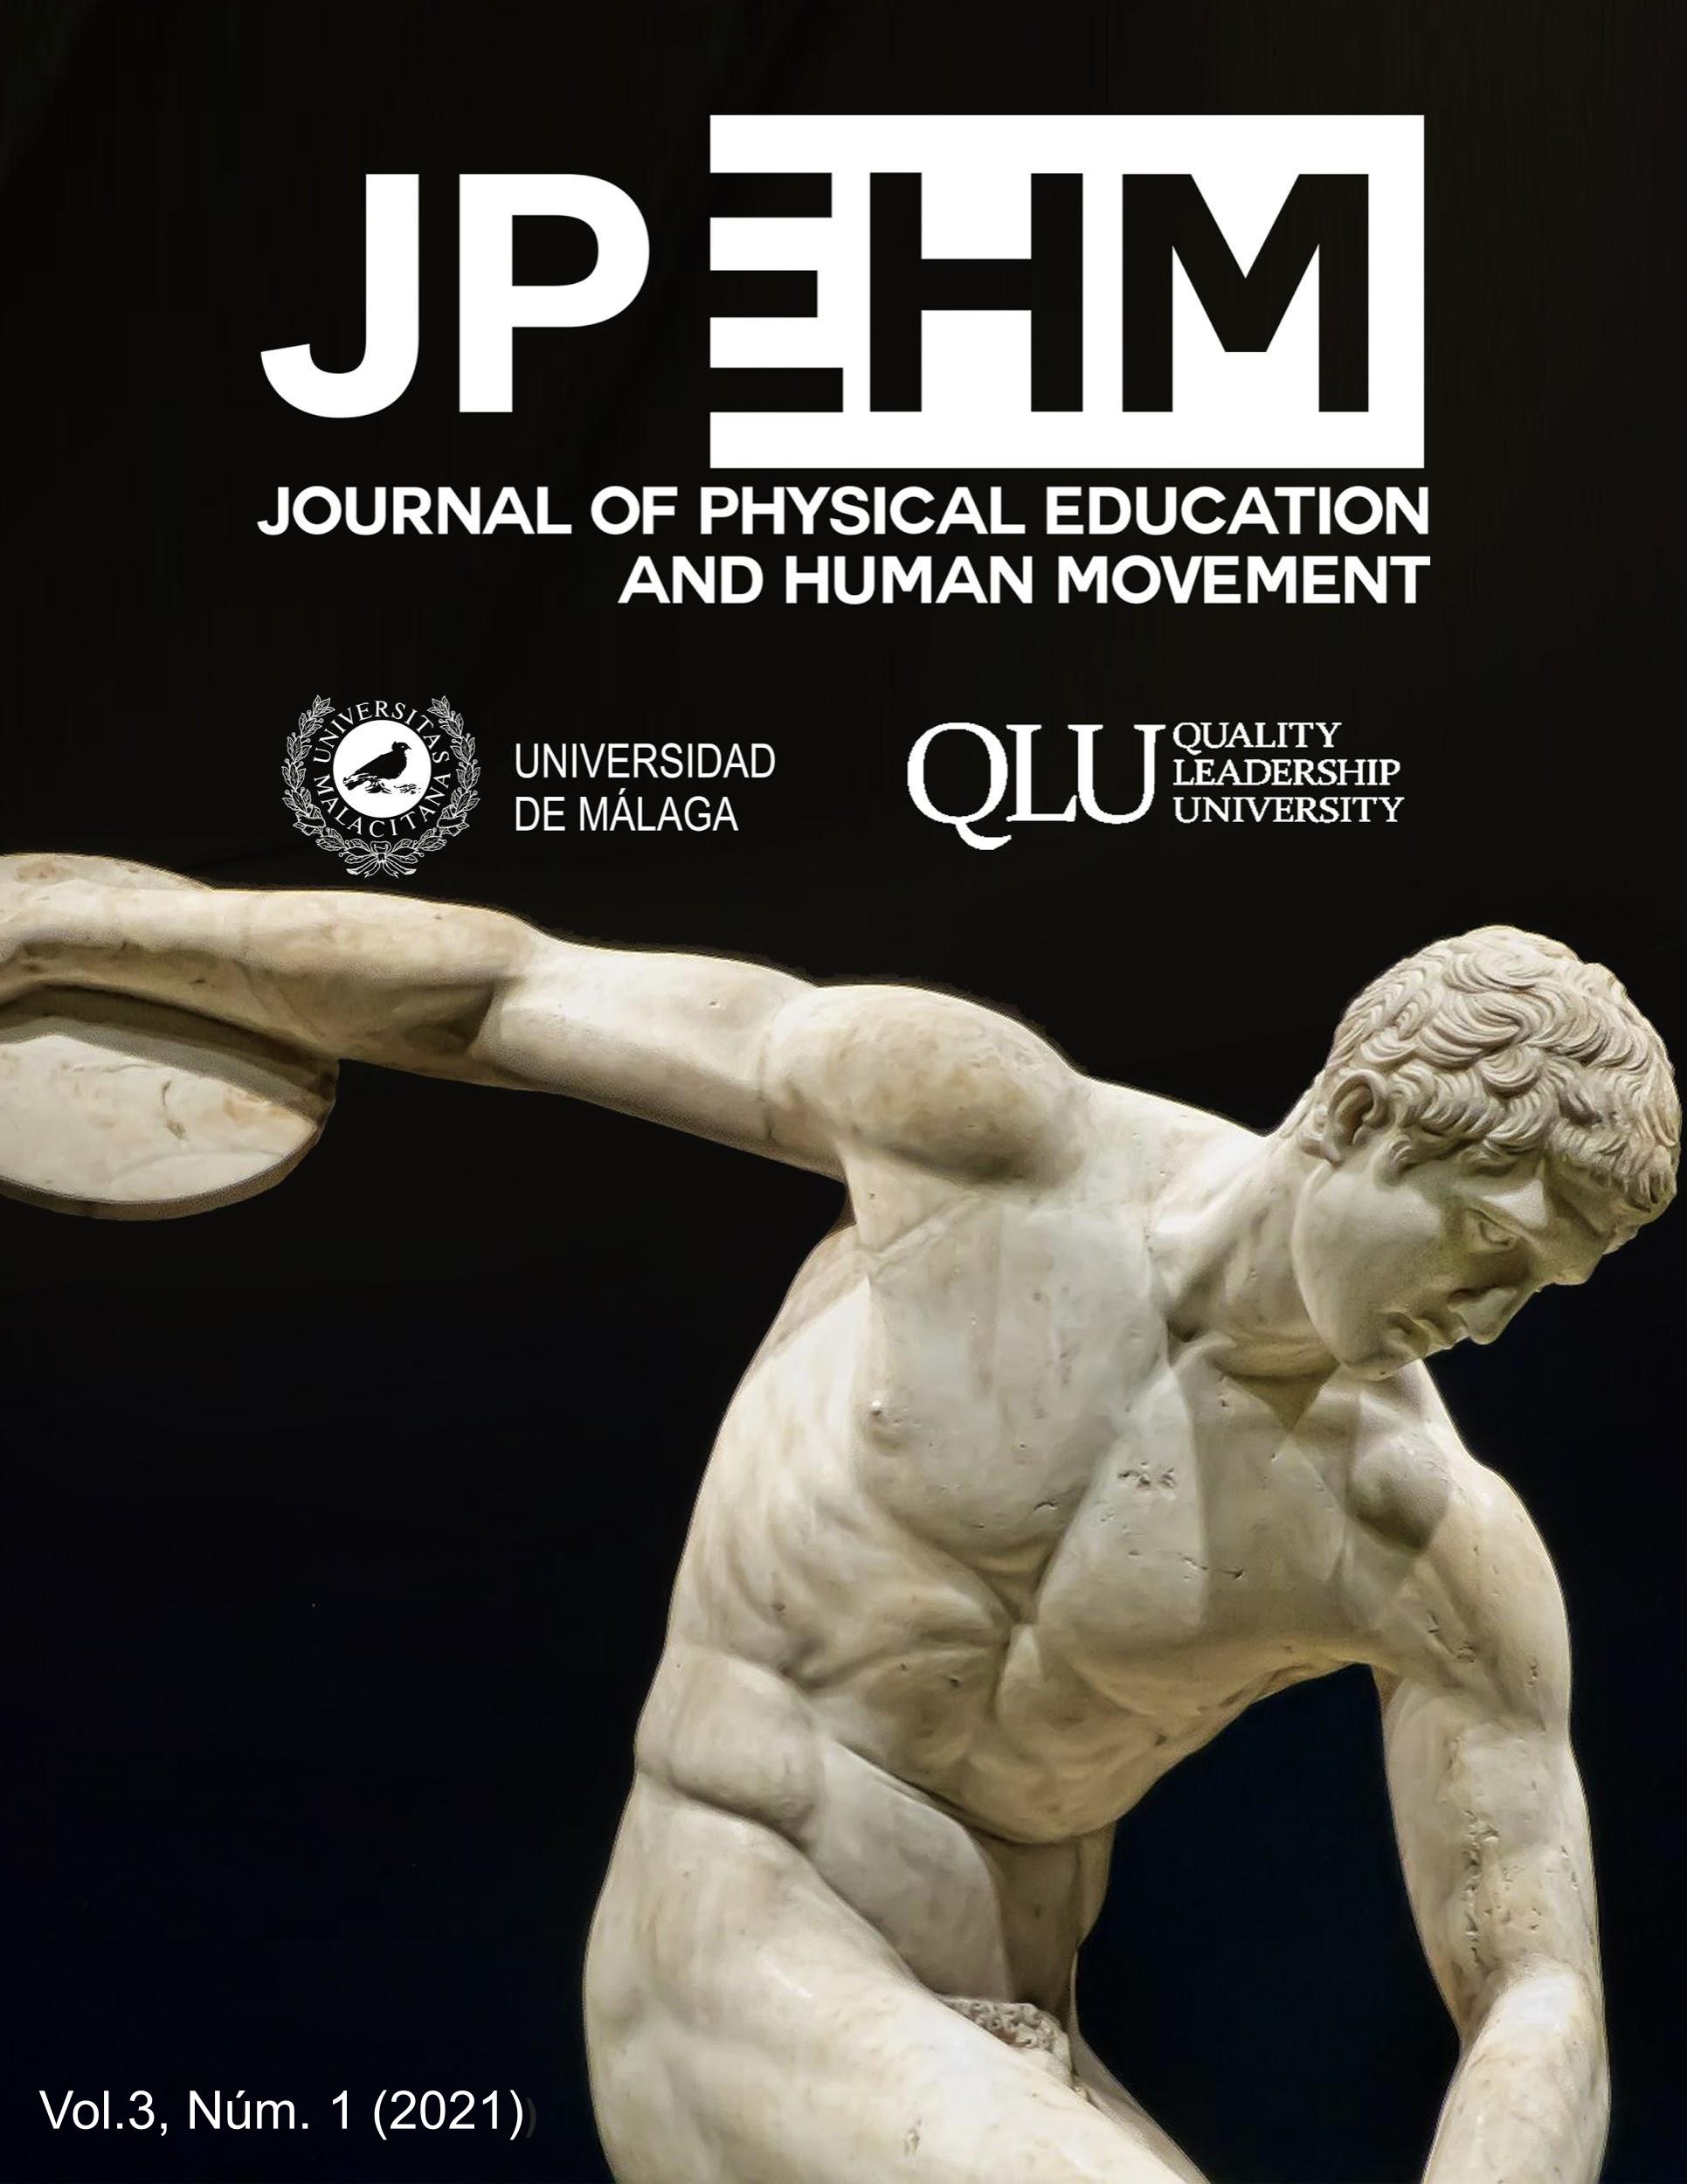 					Ver Vol. 3 Núm. 1 (2021): Journal of Physical Education and Human Movement
				